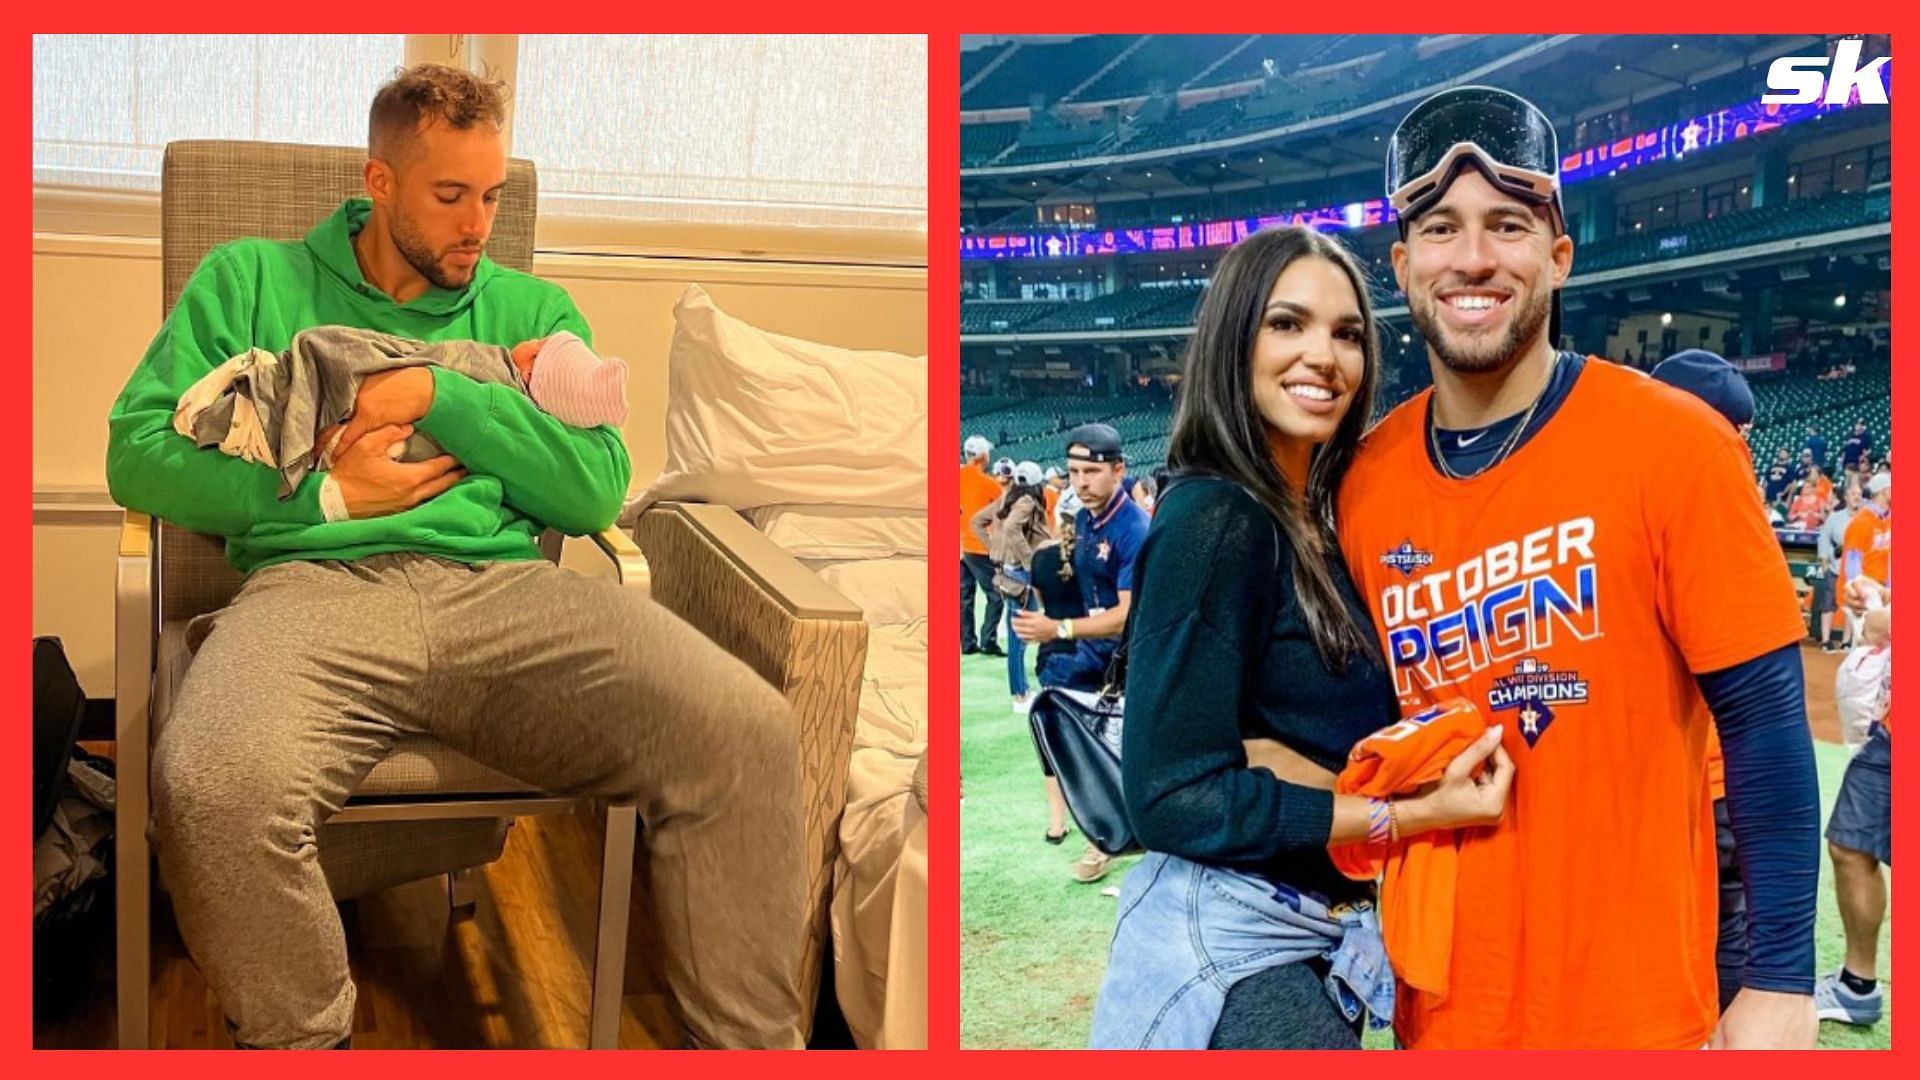 George Springer with his wife and newborn child